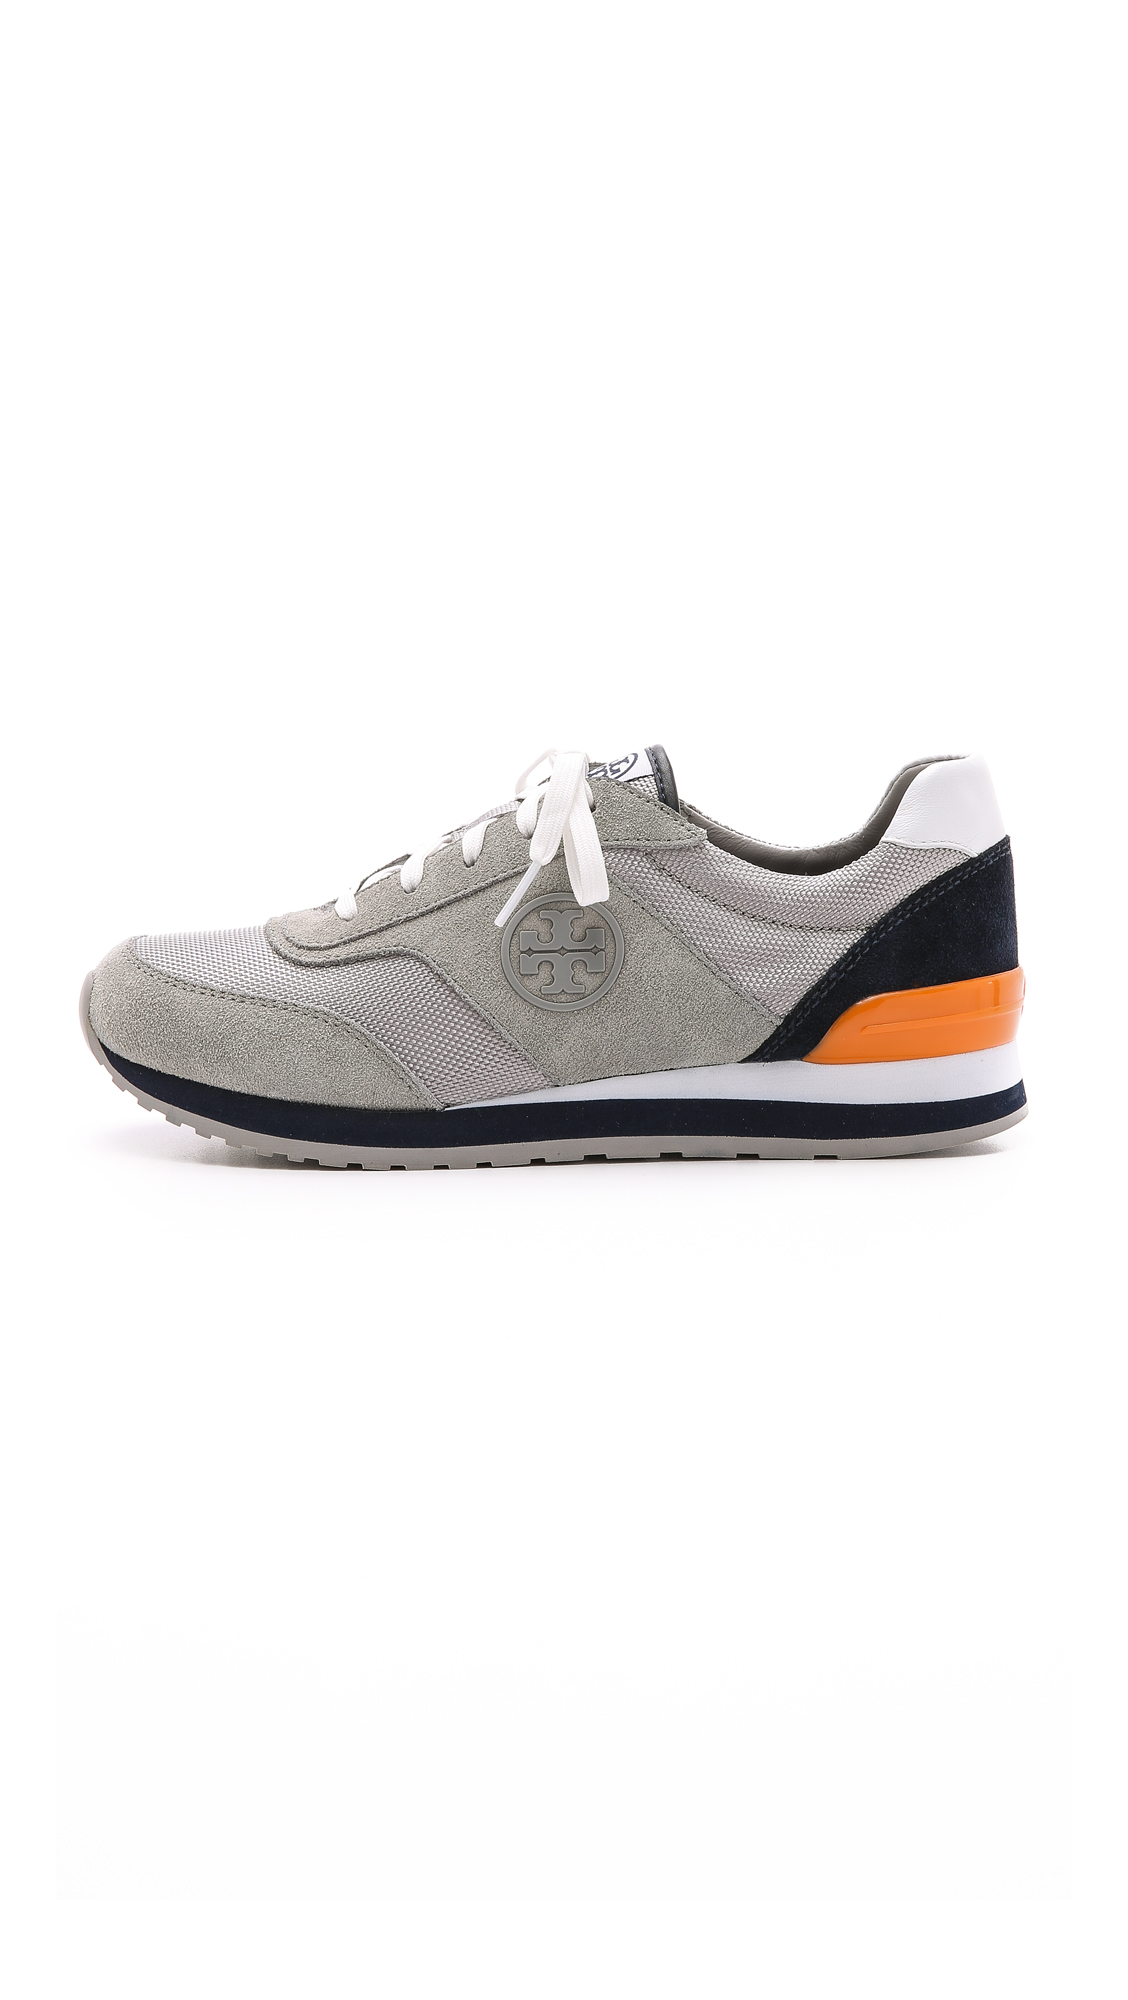 Tory Burch Sawtooth Logo Trainer Sneaker in Gray | Lyst